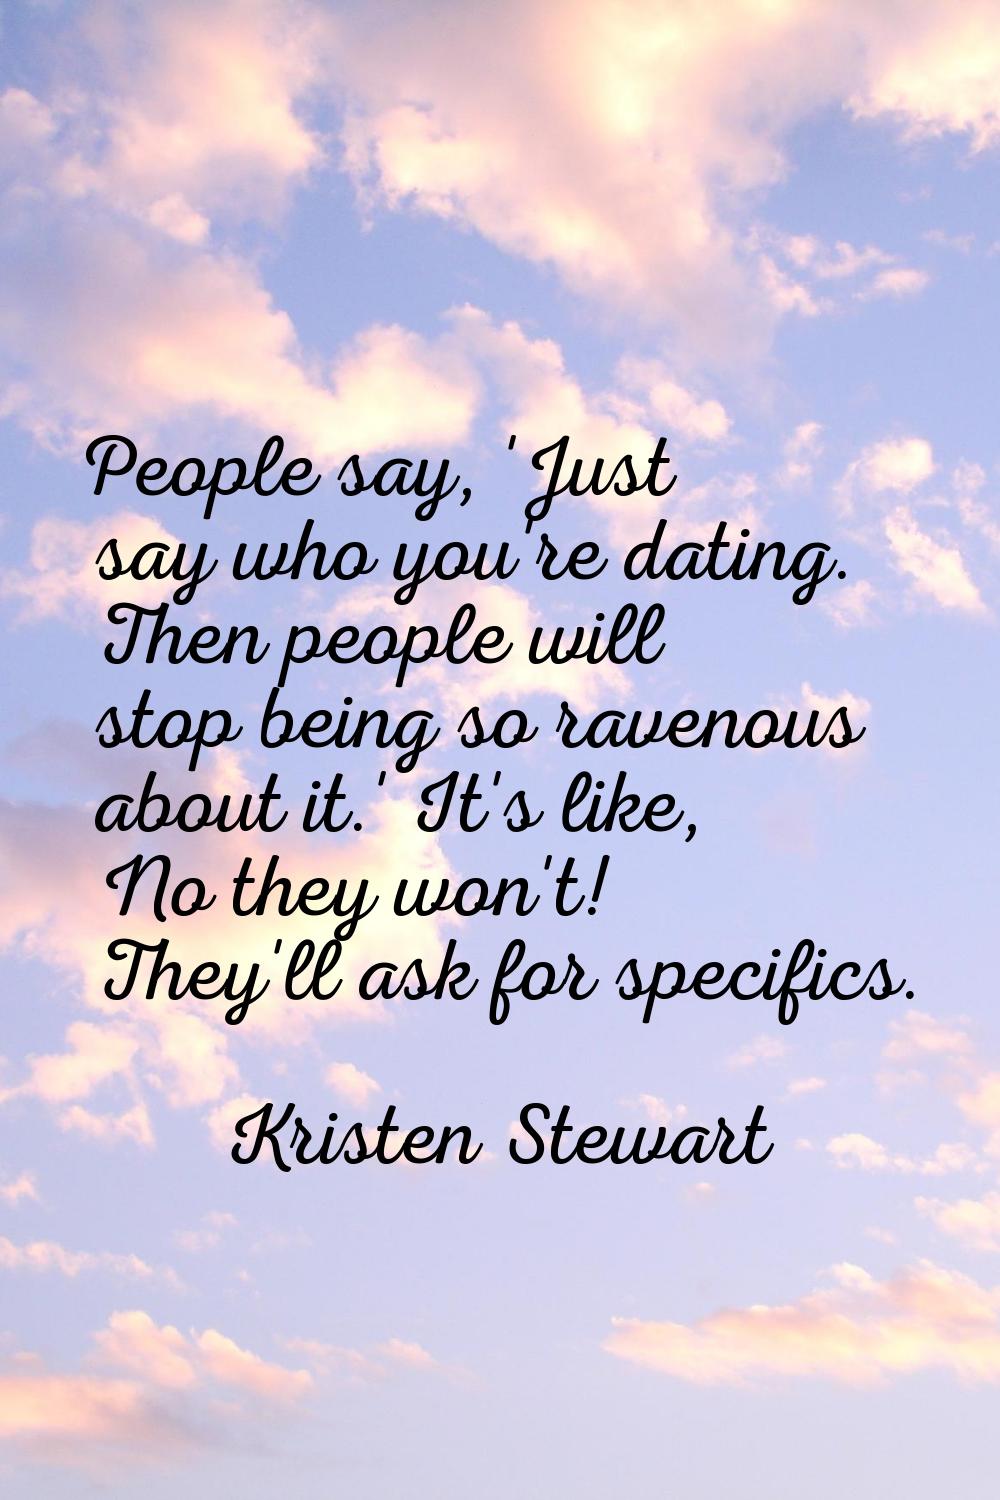 People say, 'Just say who you're dating. Then people will stop being so ravenous about it.' It's li